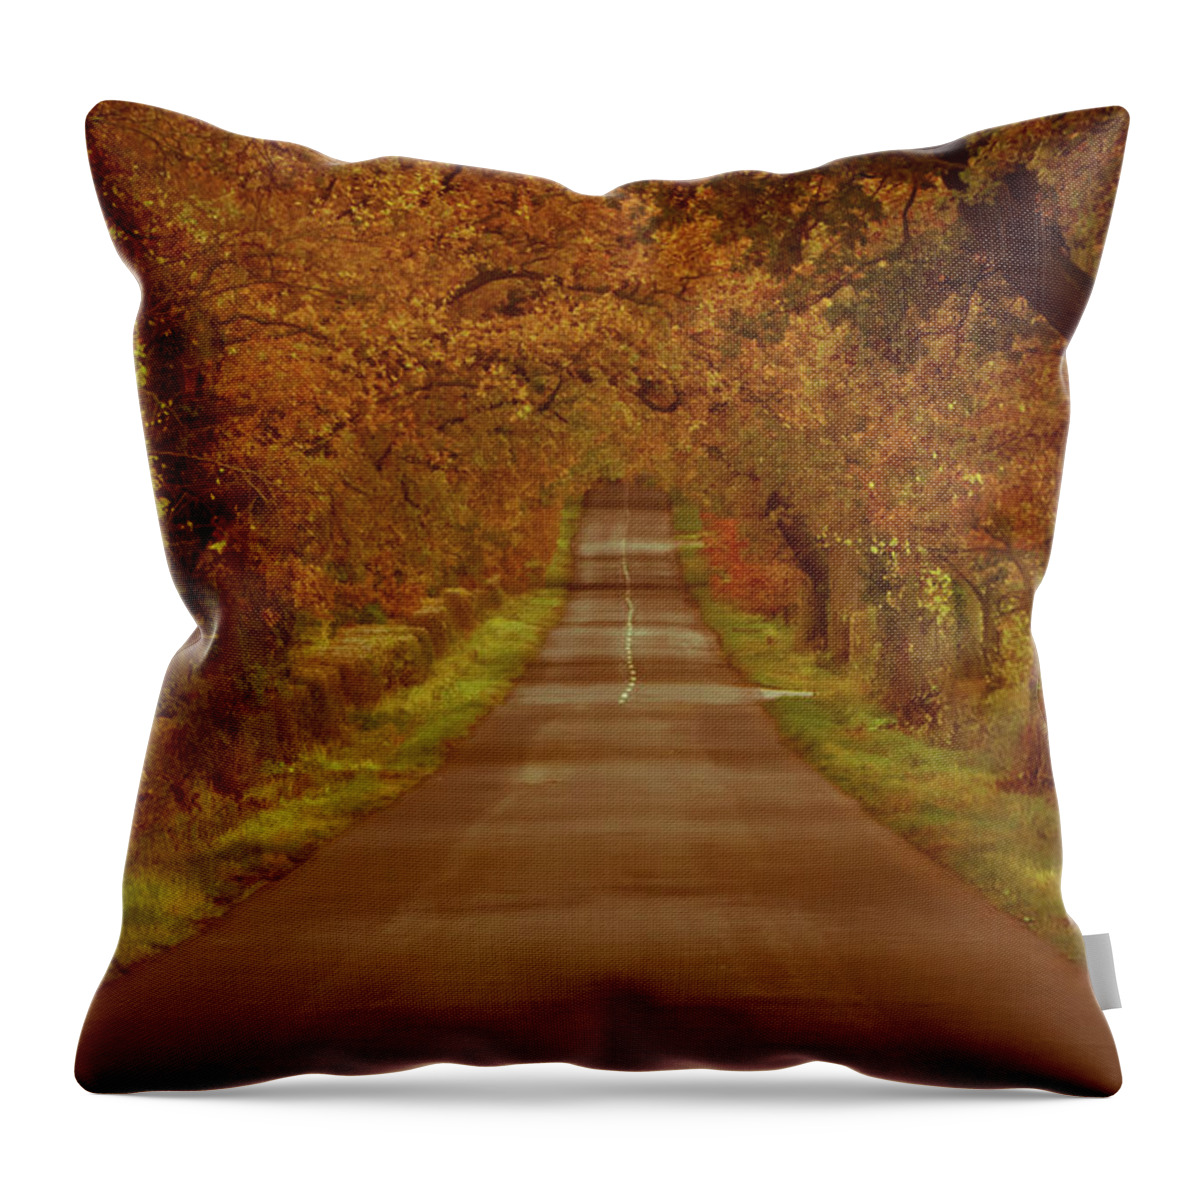 Scenics Throw Pillow featuring the photograph Walking The Autumnal Road by A Photo By Fletche